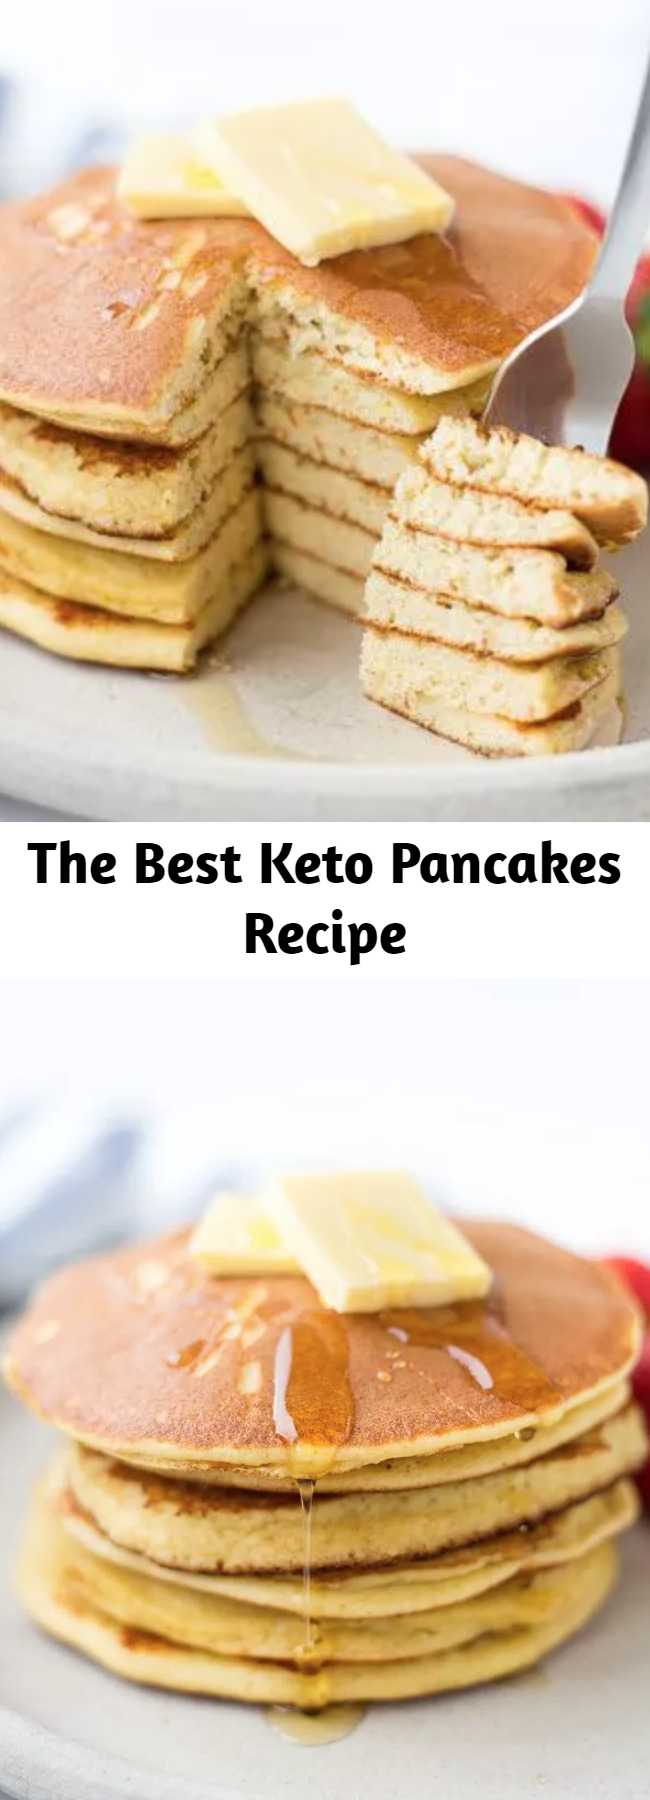 The Best Keto Pancakes Recipe - The Best Keto Pancakes recipe that has ever been made in our household! Made with just 6-ingredients this keto pancake mix is so easy to whip together with almond flour. Sunday morning pancakes will become a normal here on out.